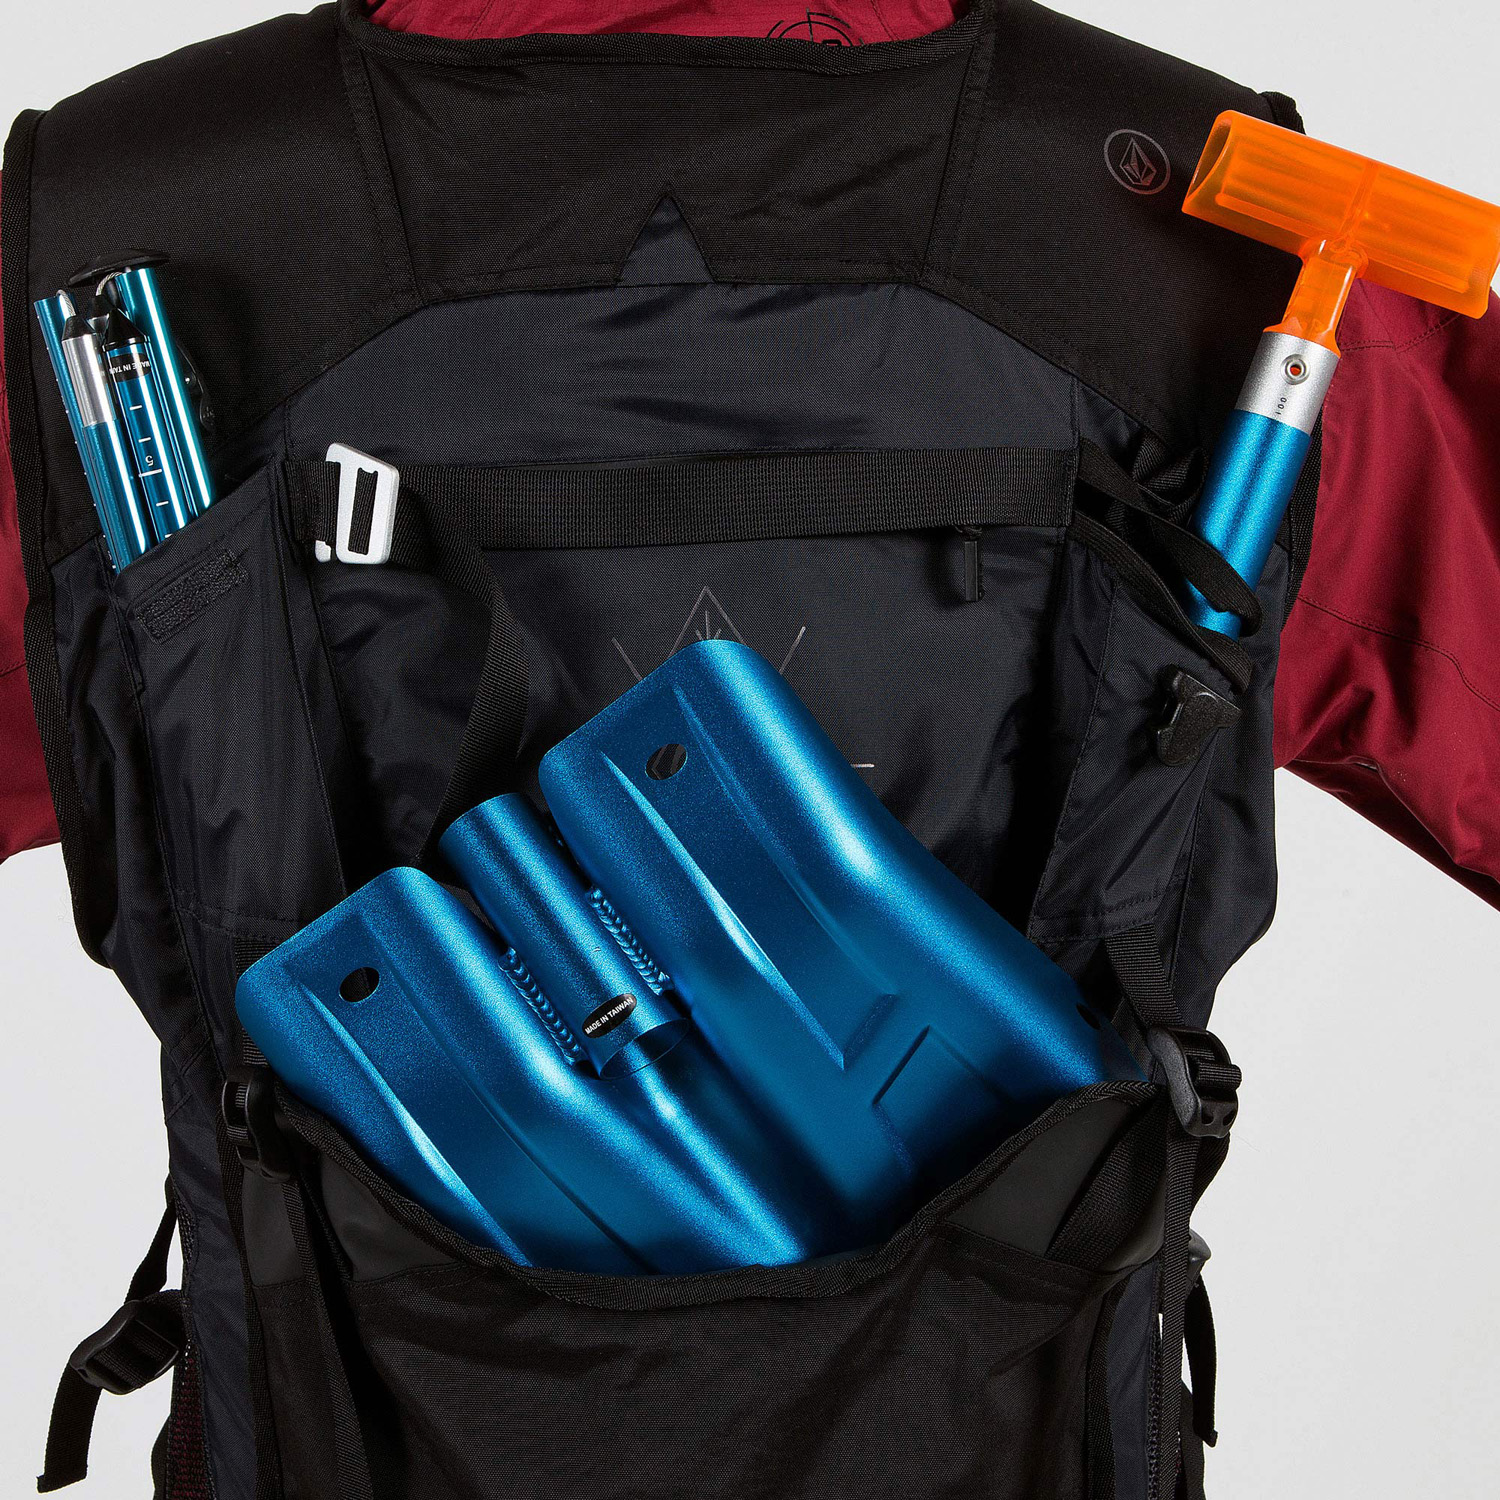 Guide vest that can store excavators and probes comfortably